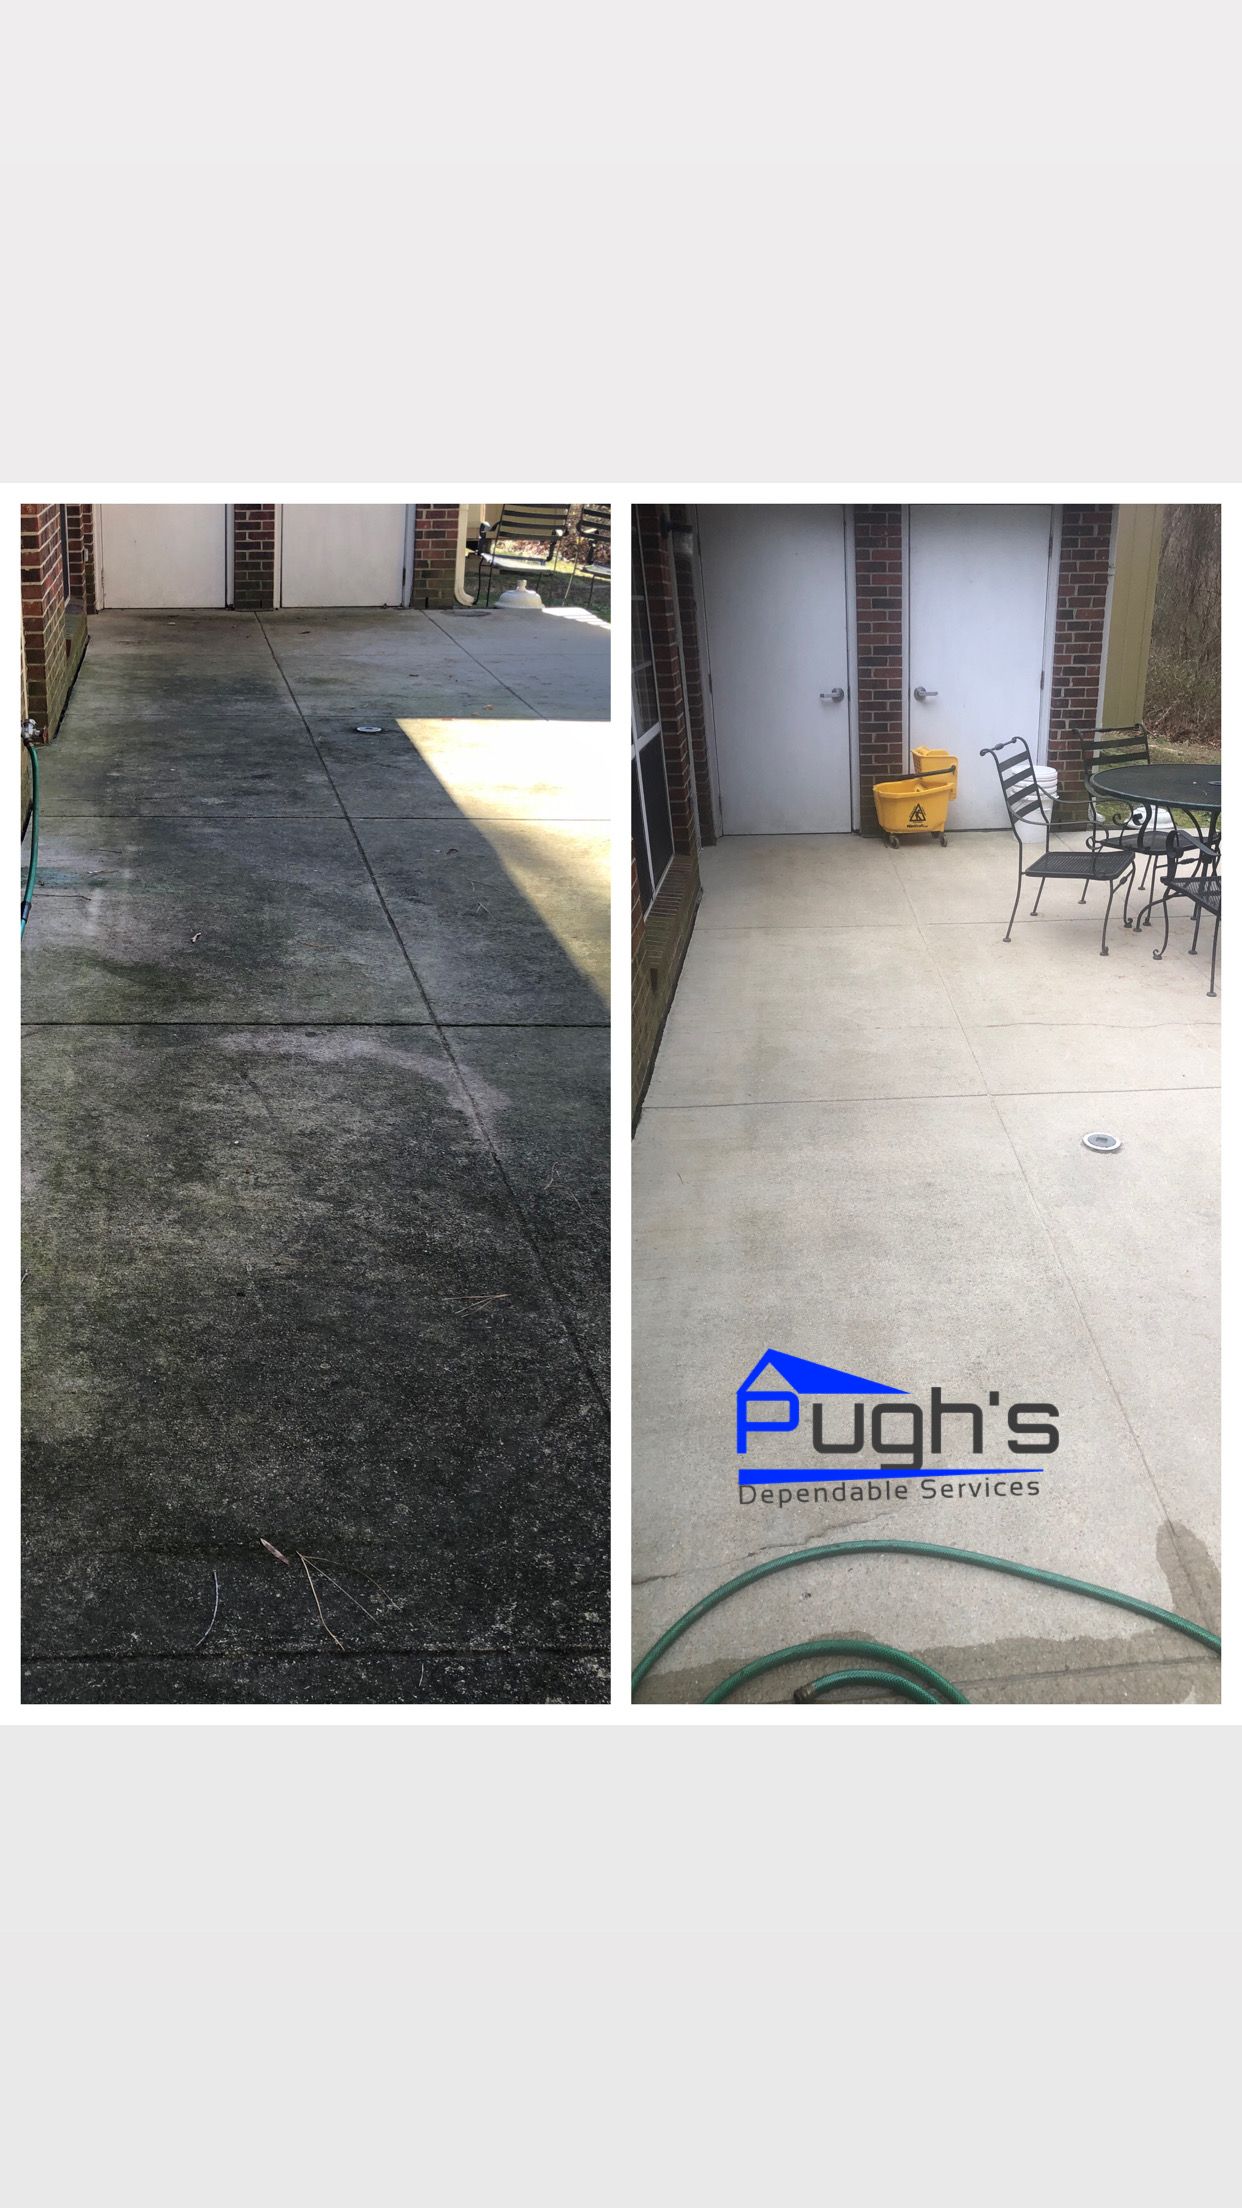 Concrete (Flatwork) Cleaning for Pugh's Dependable Services, L.L.C. in Raleigh, NC